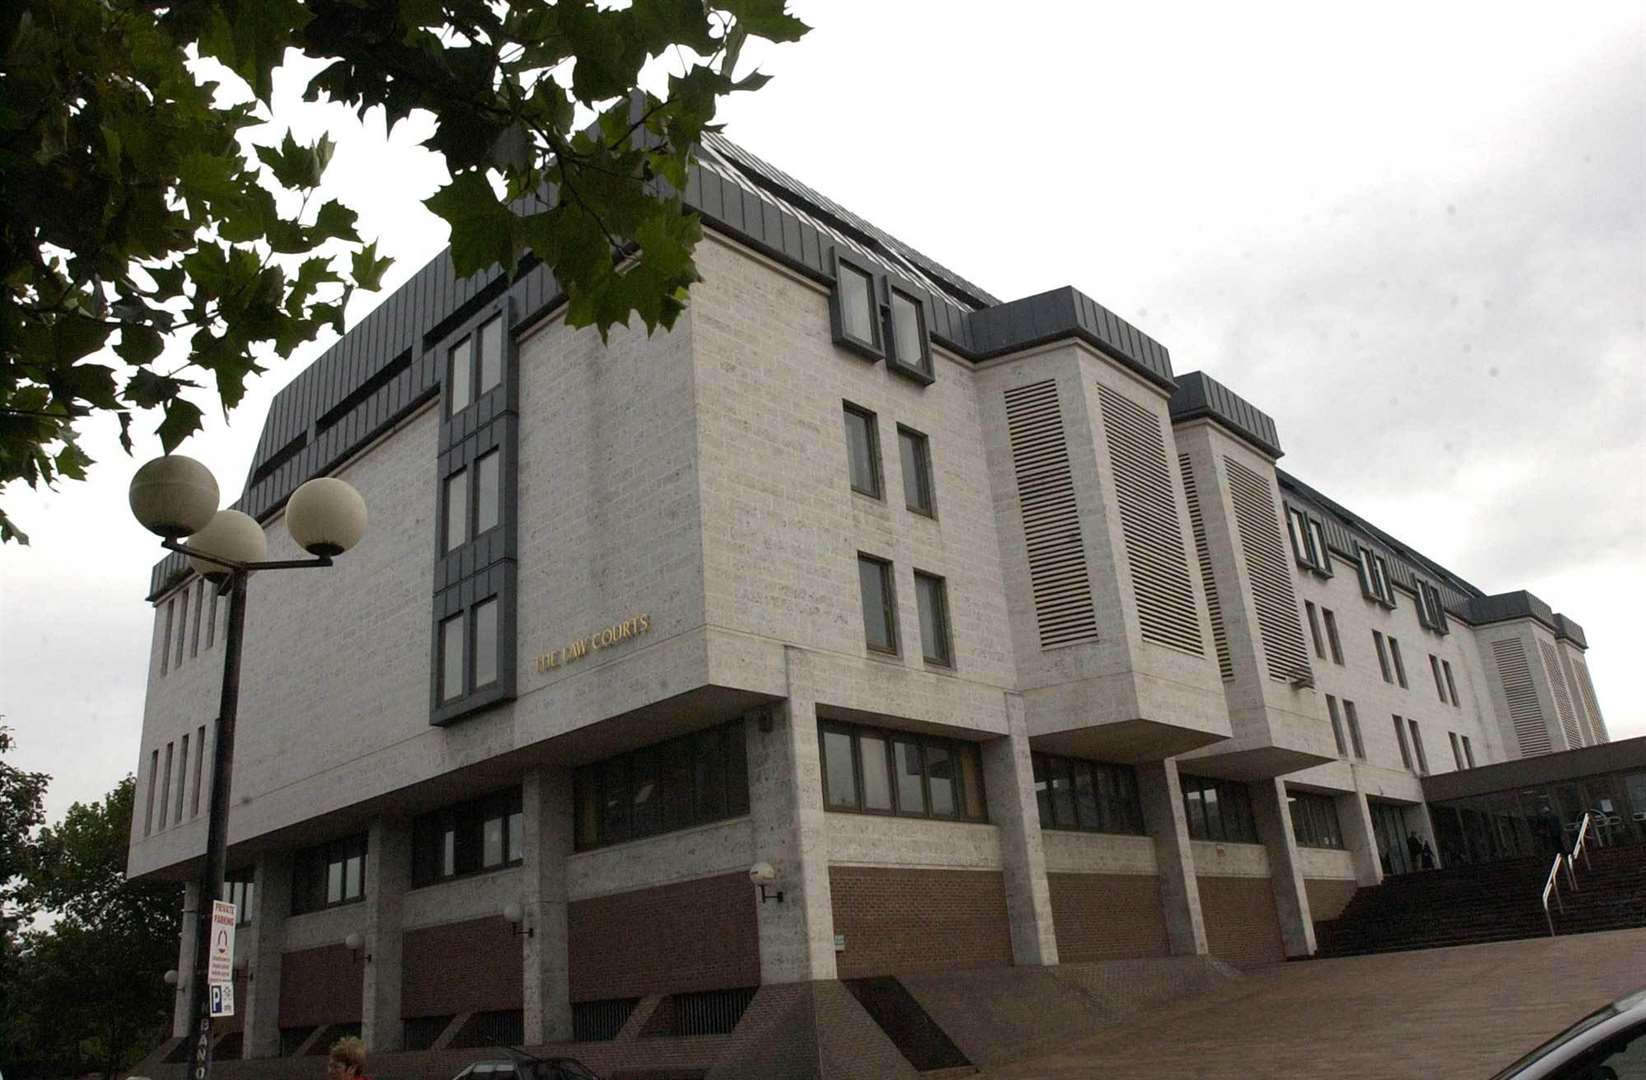 The four men were sentenced at Maidstone Crown Court